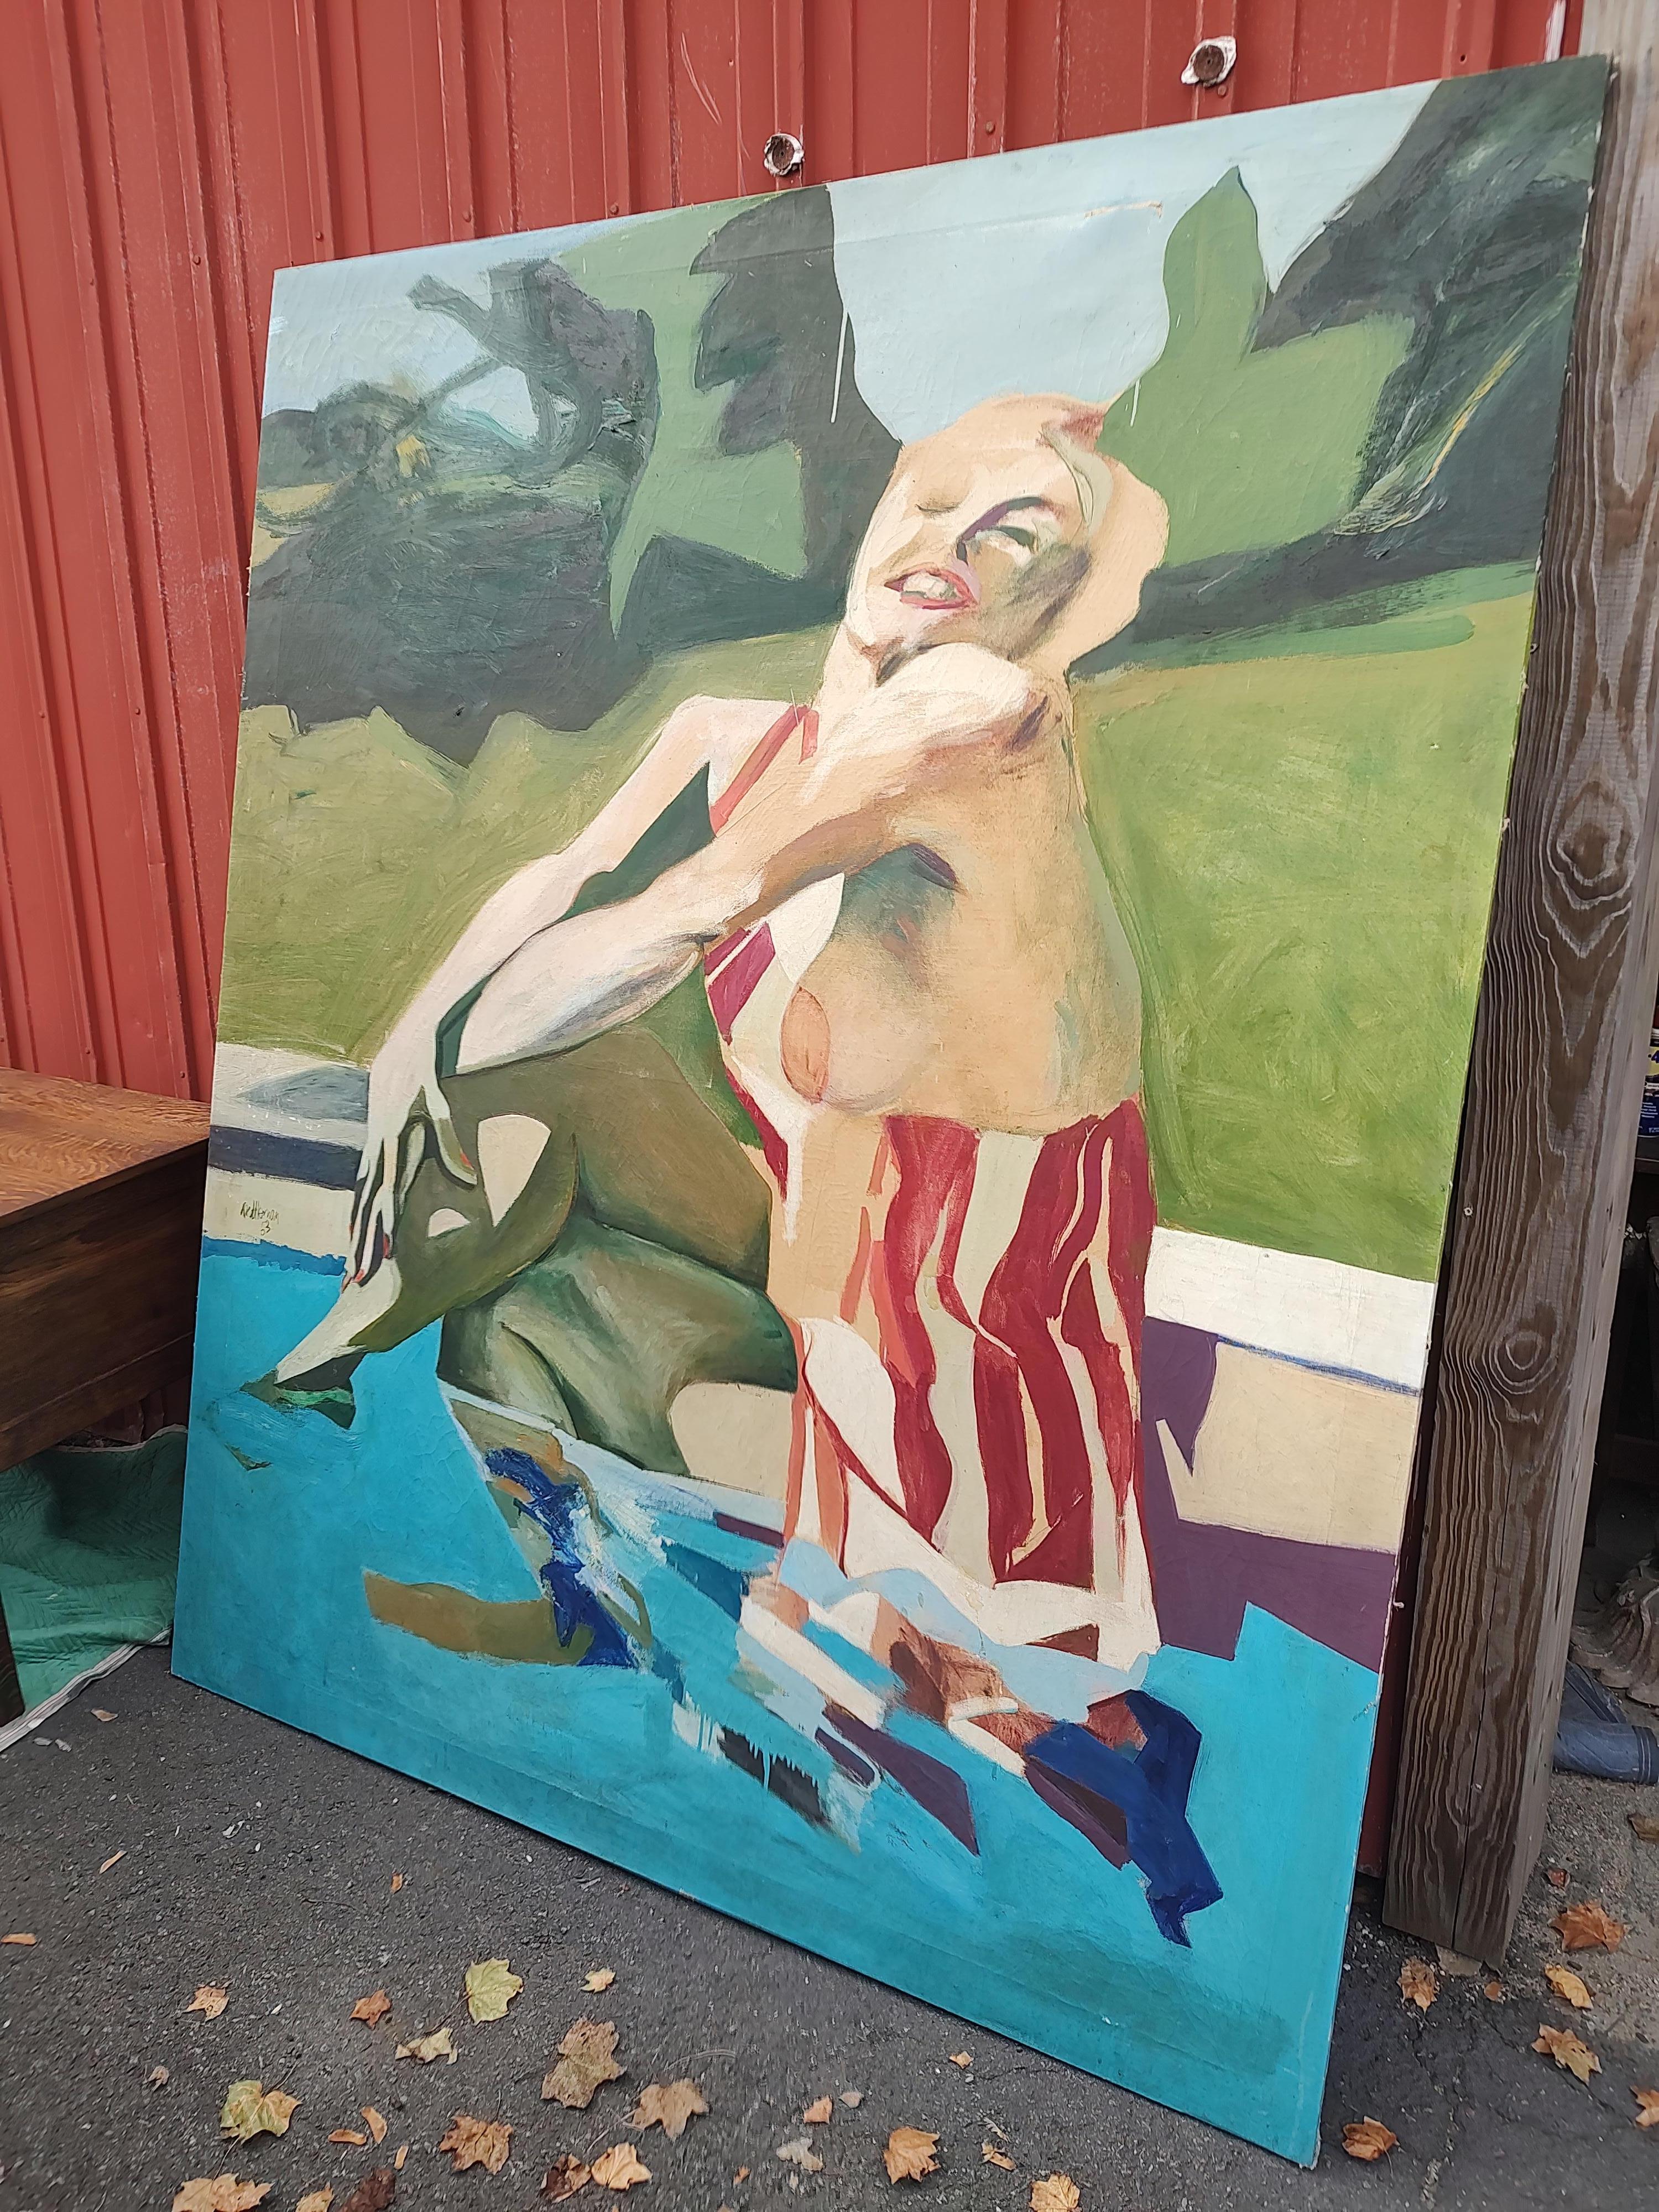 Canvas Large Mid Century Modern Painting of a Marilynesque Figure by the Pool 1963 For Sale